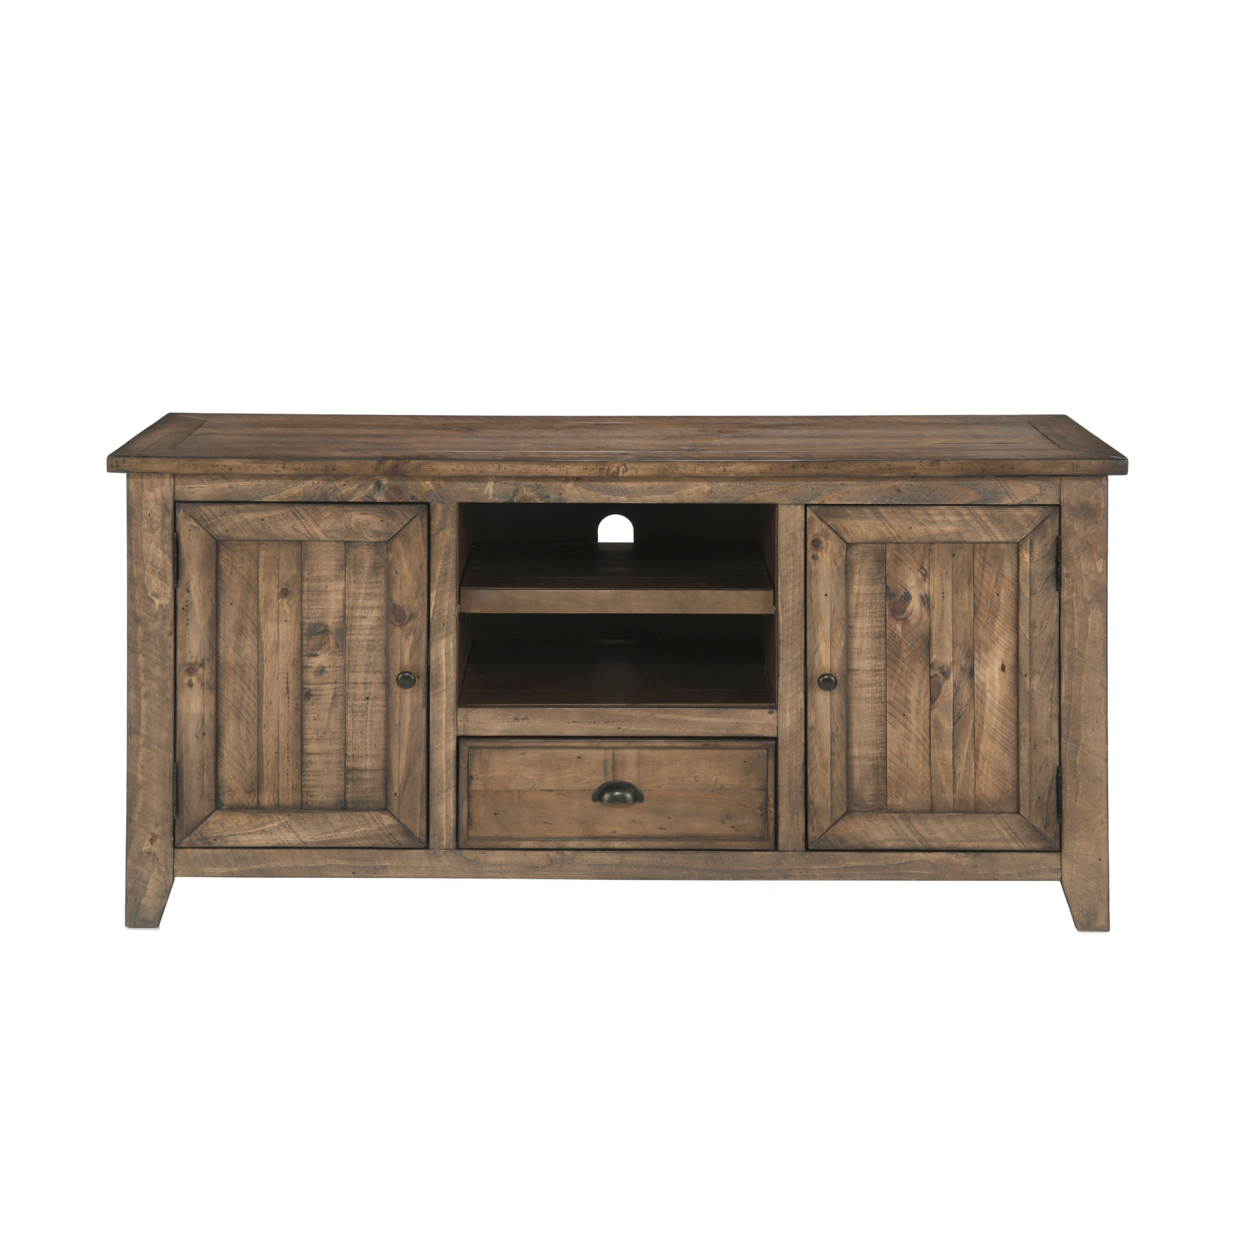 Coastal Style Wooden TV Stand With 2 Cabinets And 1 Drawer, Brown- Saltoro Sherpi